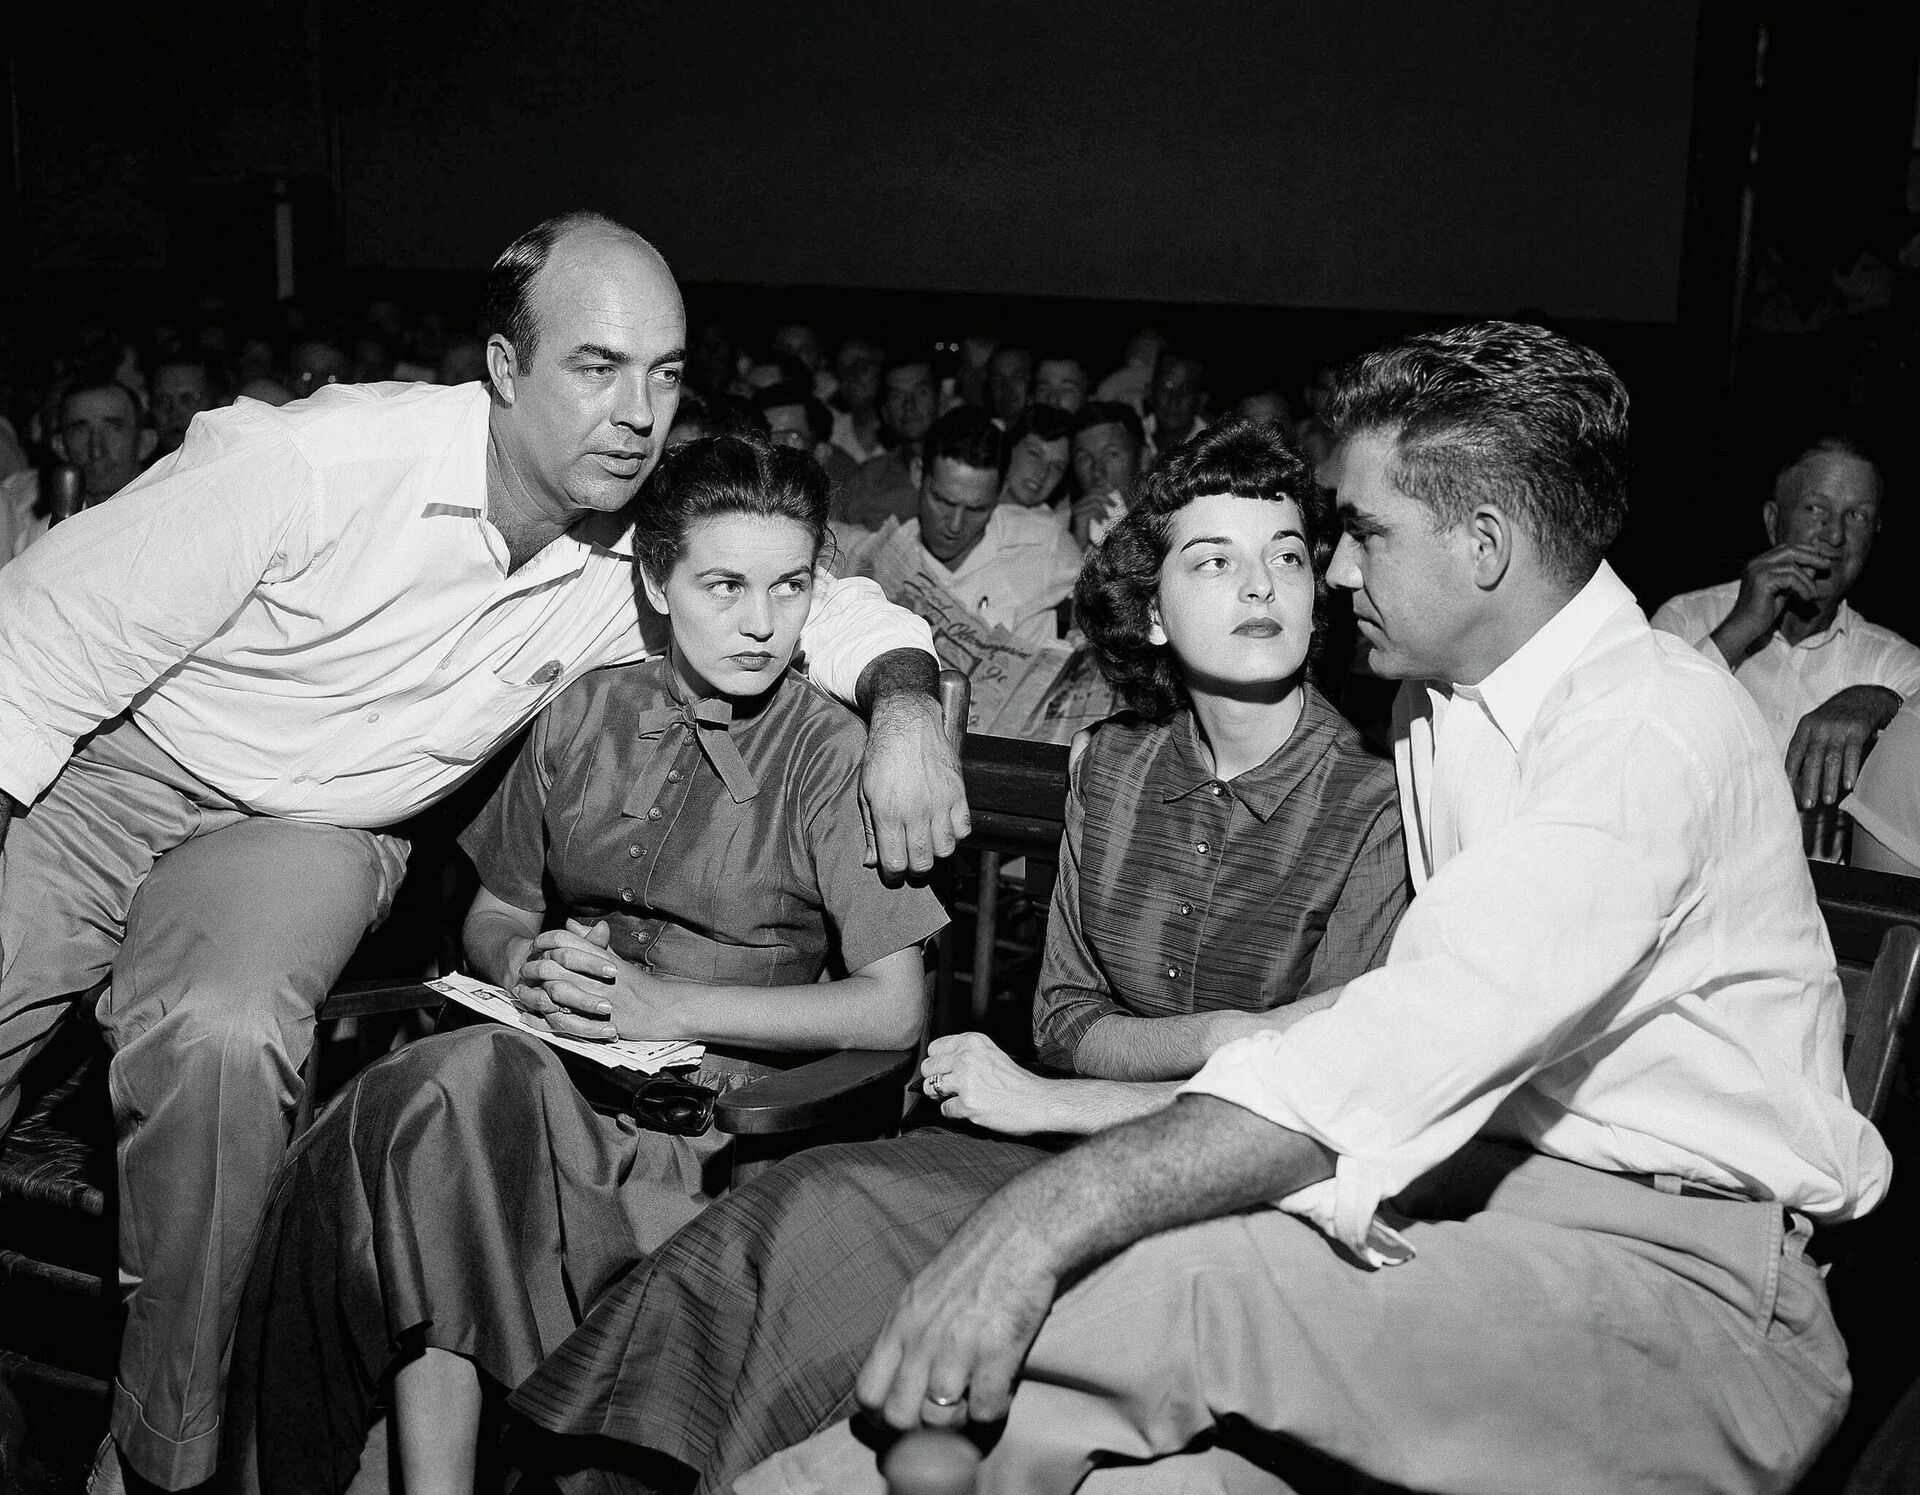 FILE - In this Sept. 23, 1955, file photo, J.W. Milam, left, his wife, second from left, Roy Bryant, far right, and his wife, Carolyn Bryant, sit together in a courtroom in Sumner, Miss. Bryant and his half-brother Milam were charged with murder but acquitted in the kidnapping and torture slaying of 14-year-old black teen Emmett Till in 1955 after he allegedly whistled at Carolyn Bryant. A team searching the basement of a Mississippi courthouse for evidence about the lynching of Black teenager Emmett Till has found the unserved warrant in June 2022 charging a white woman in his kidnapping in 1955, and relatives of the victim want authorities to finally arrest her nearly 70 years later.  - Sputnik International, 1920, 09.08.2022